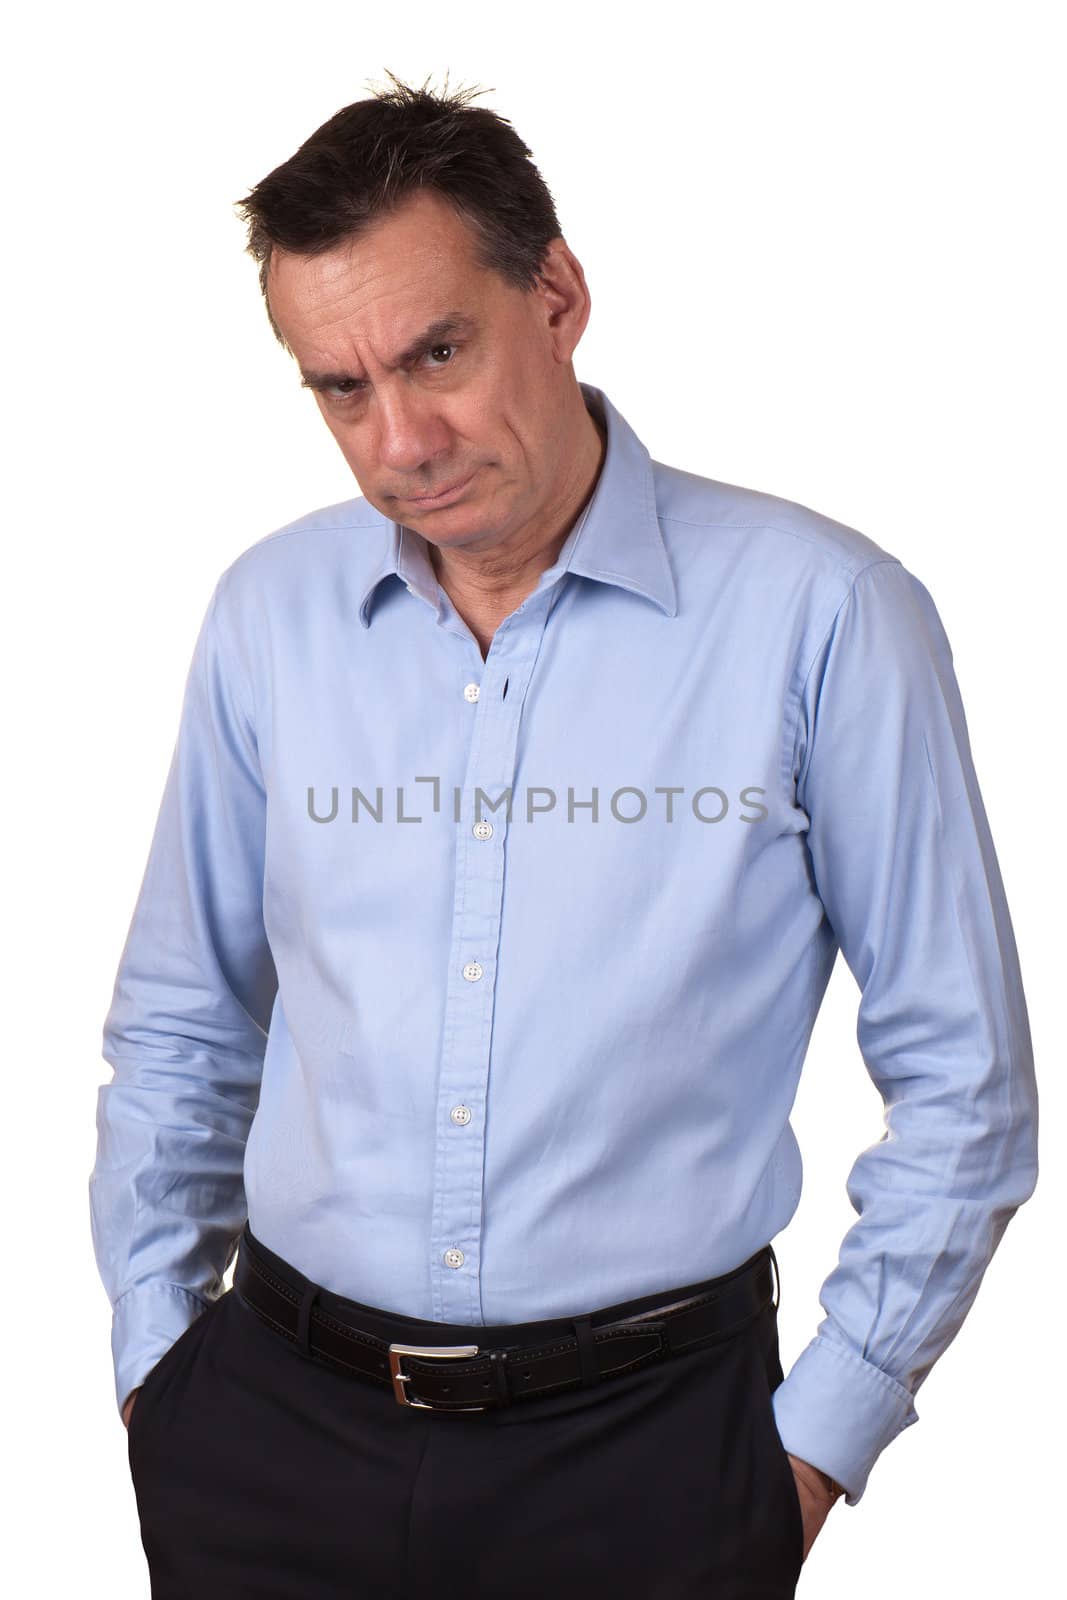 Angry Frowning Grump Man with Hands in Pockets by scheriton